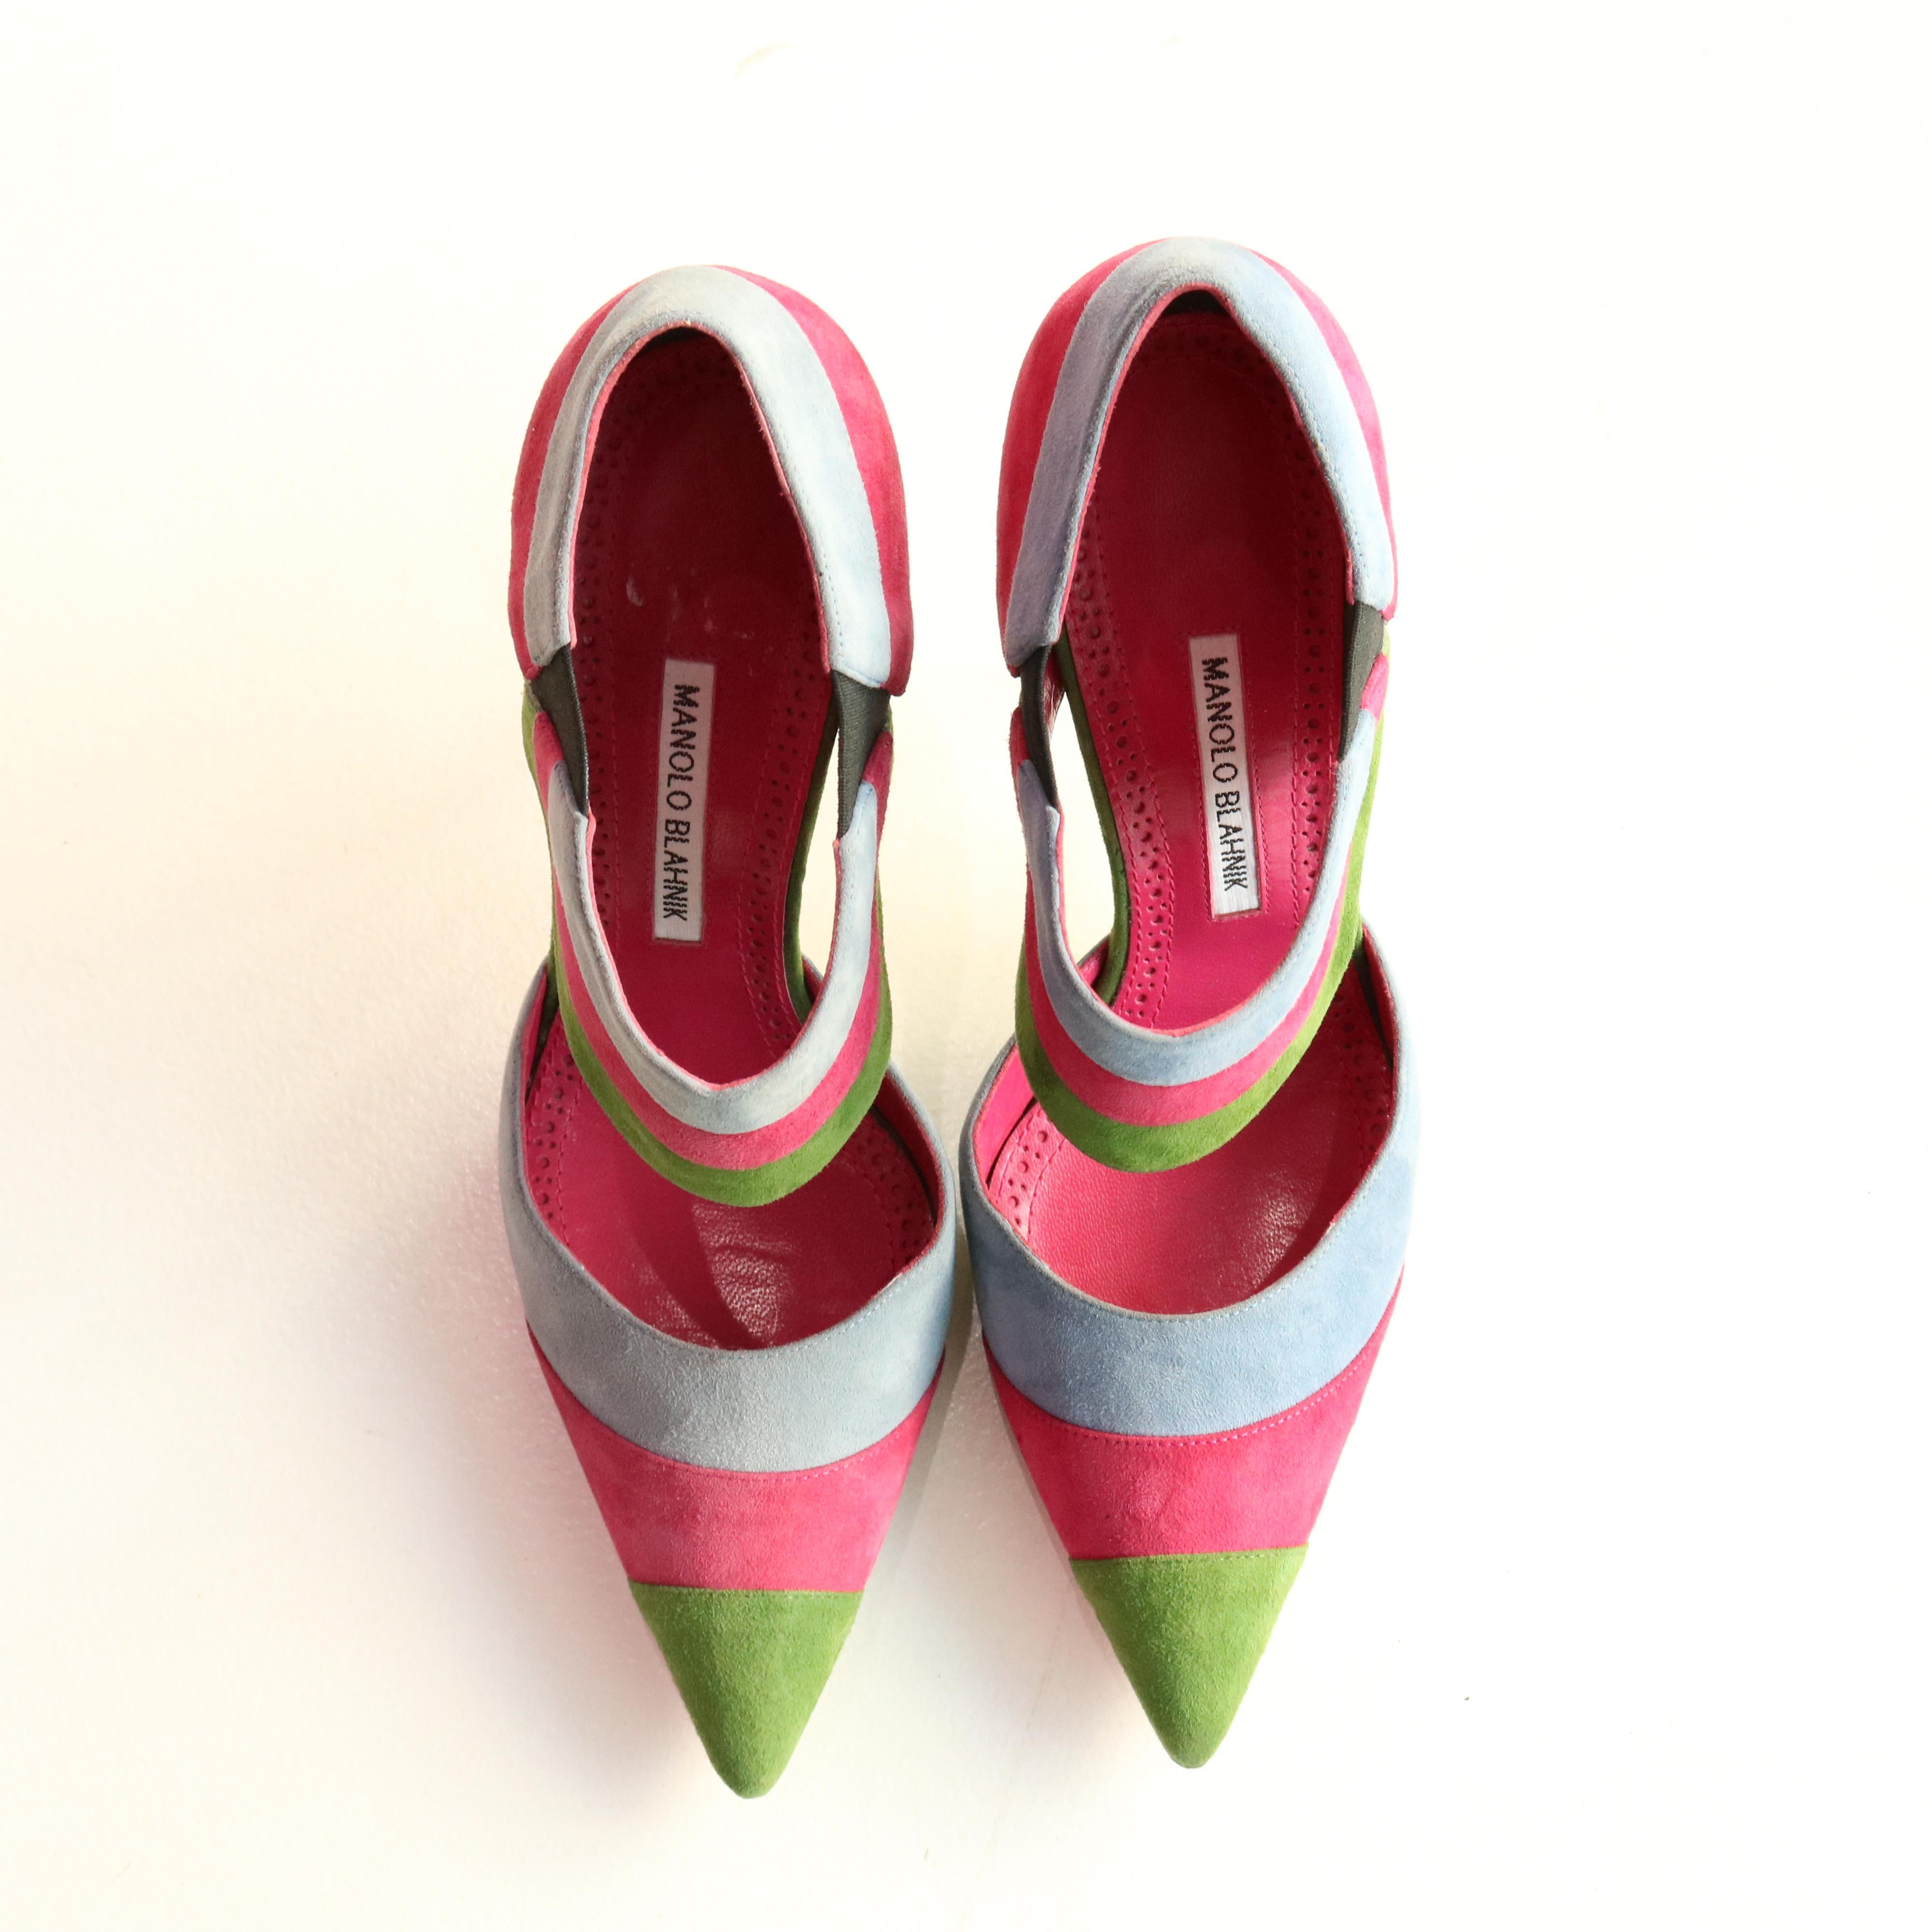 Unique, vintage, rare multi colored vintage style Manolo Blahnik pumps with pointed toe and ankle strap.
multi colored pink, green, and blue.
Size 40 
Heel: 11 cm (4.3 inches)
Hand Made in Italy 
